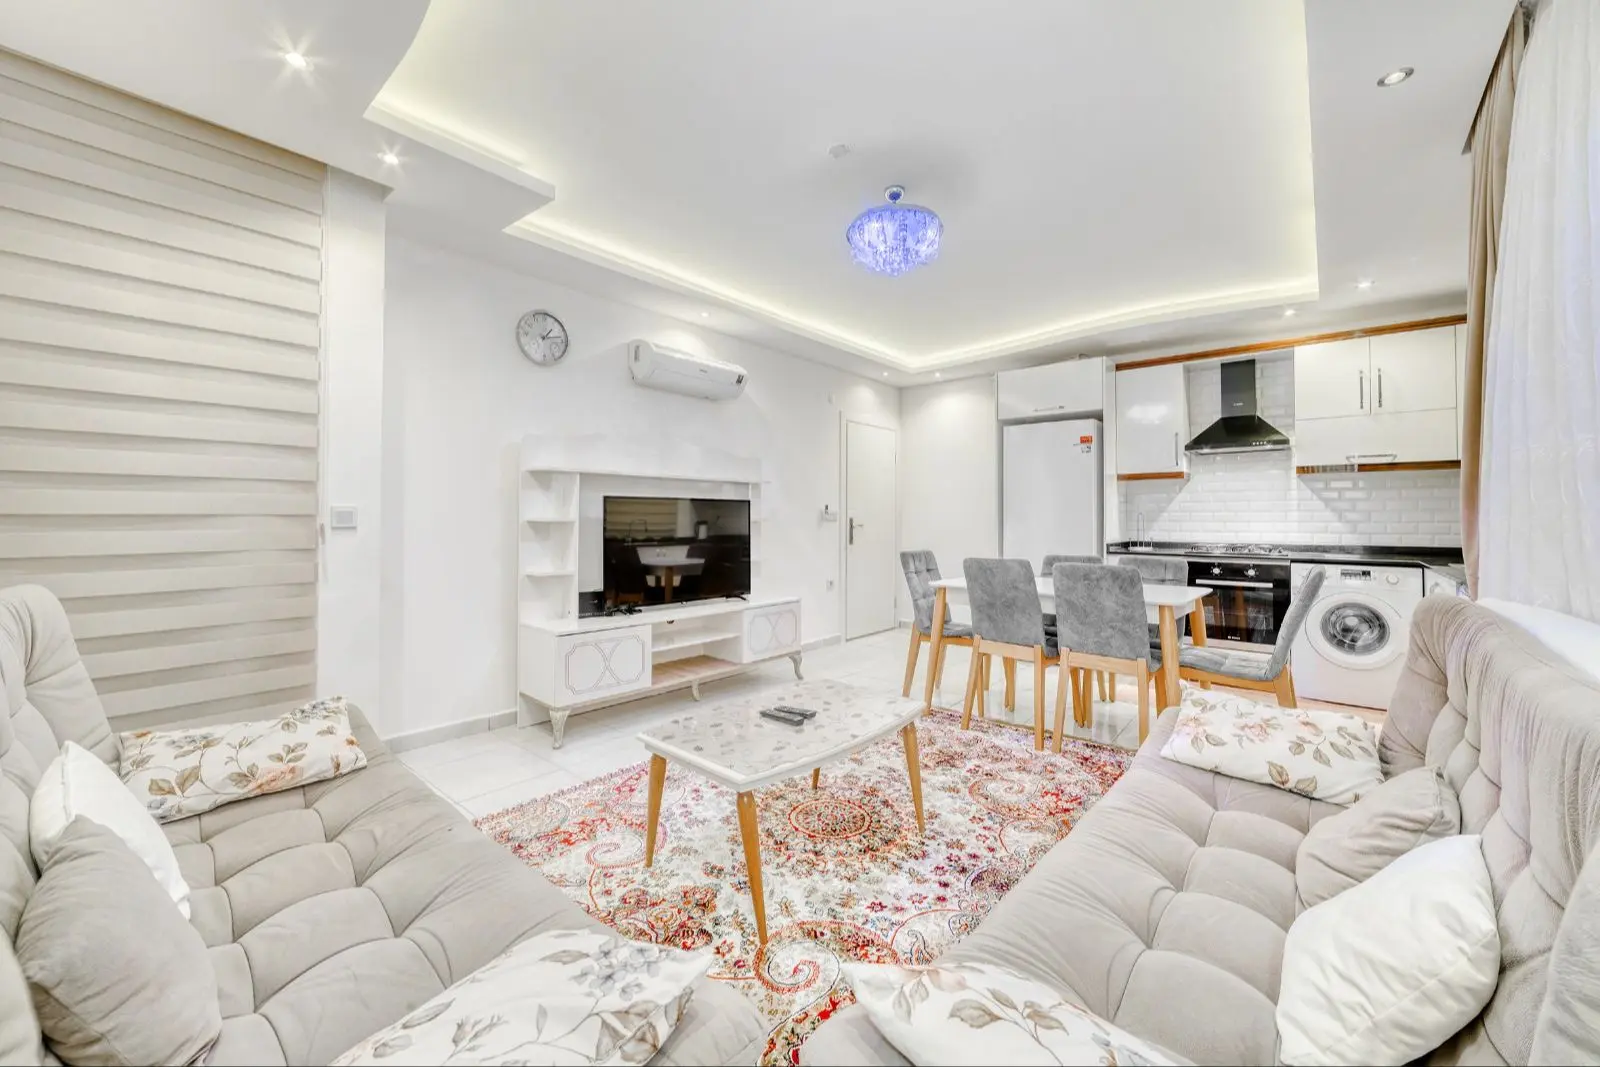 SPACIOUS 2+1 FLAT IN MAHMUTLAR, ONLY 250 M TO THE SEA